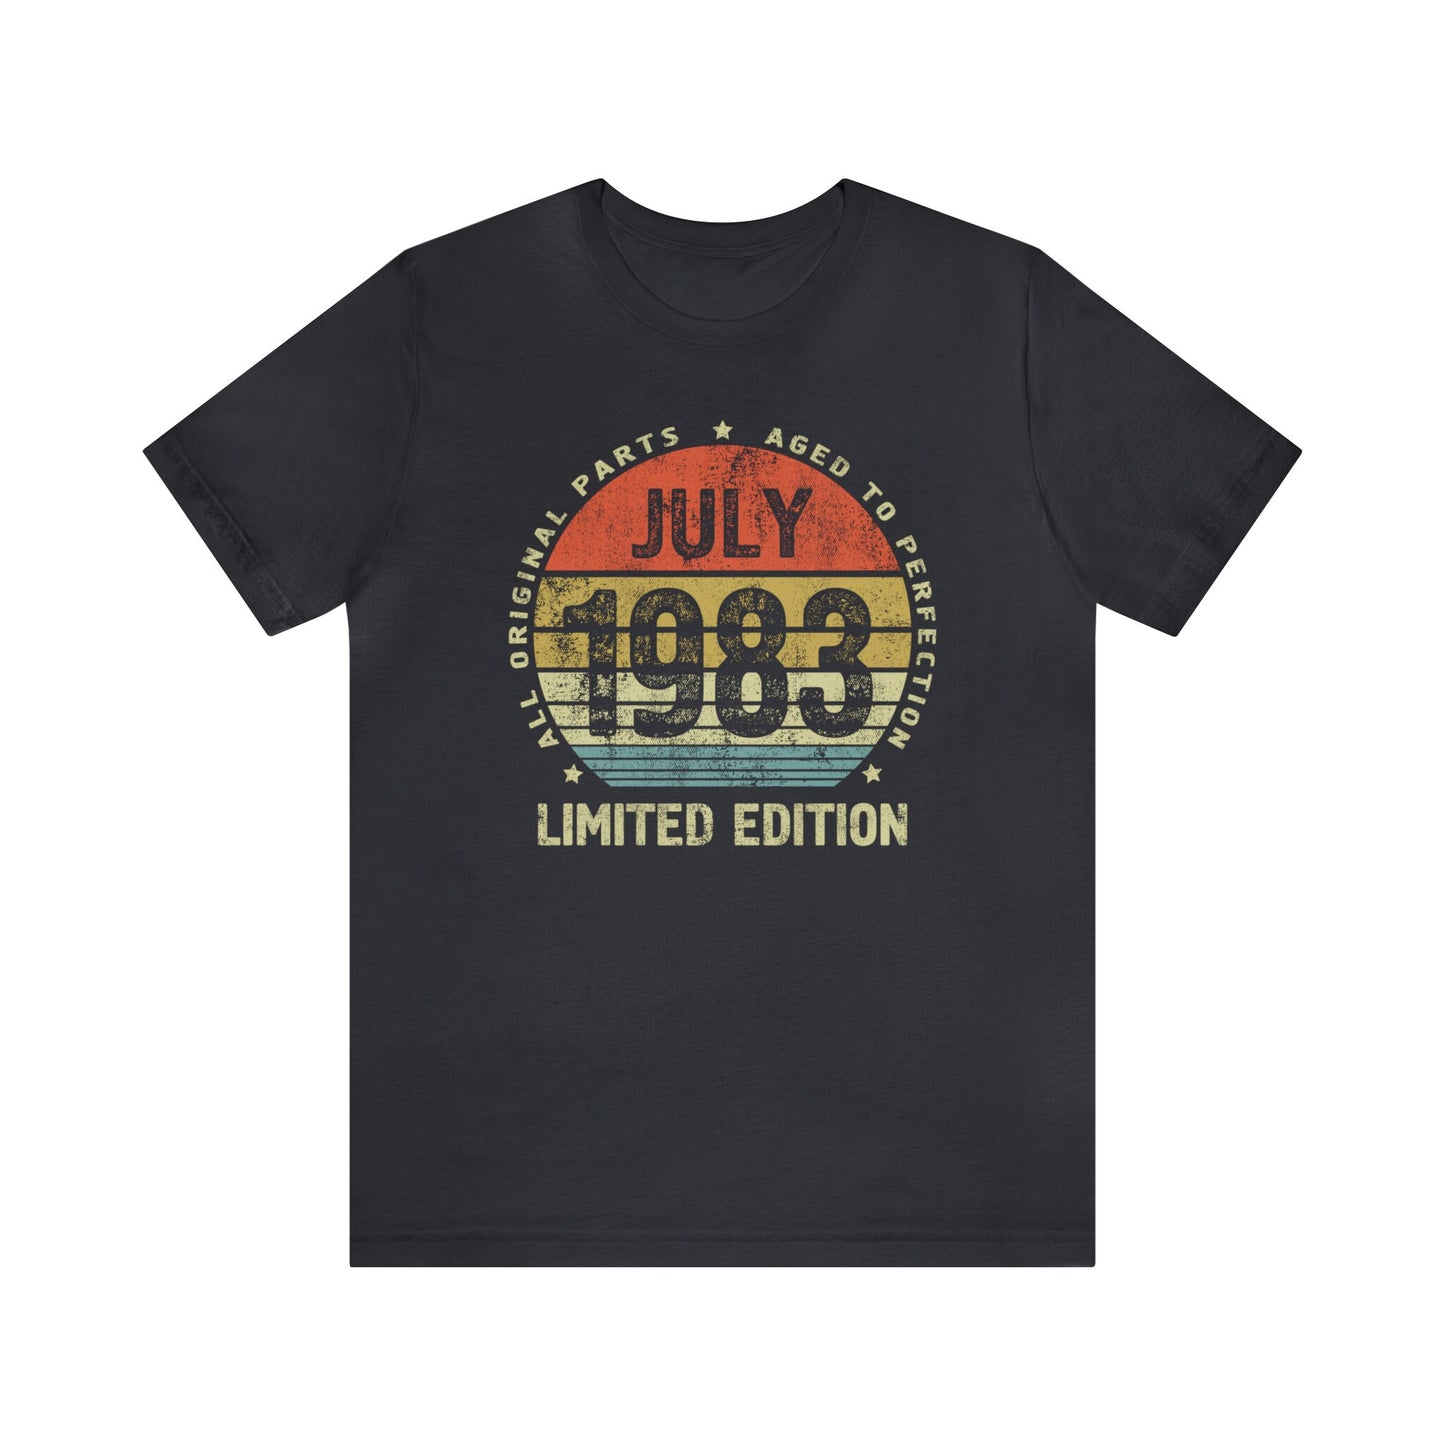 July 1983 birthday gift t-shirt for women or men,  shirt for sister or brother